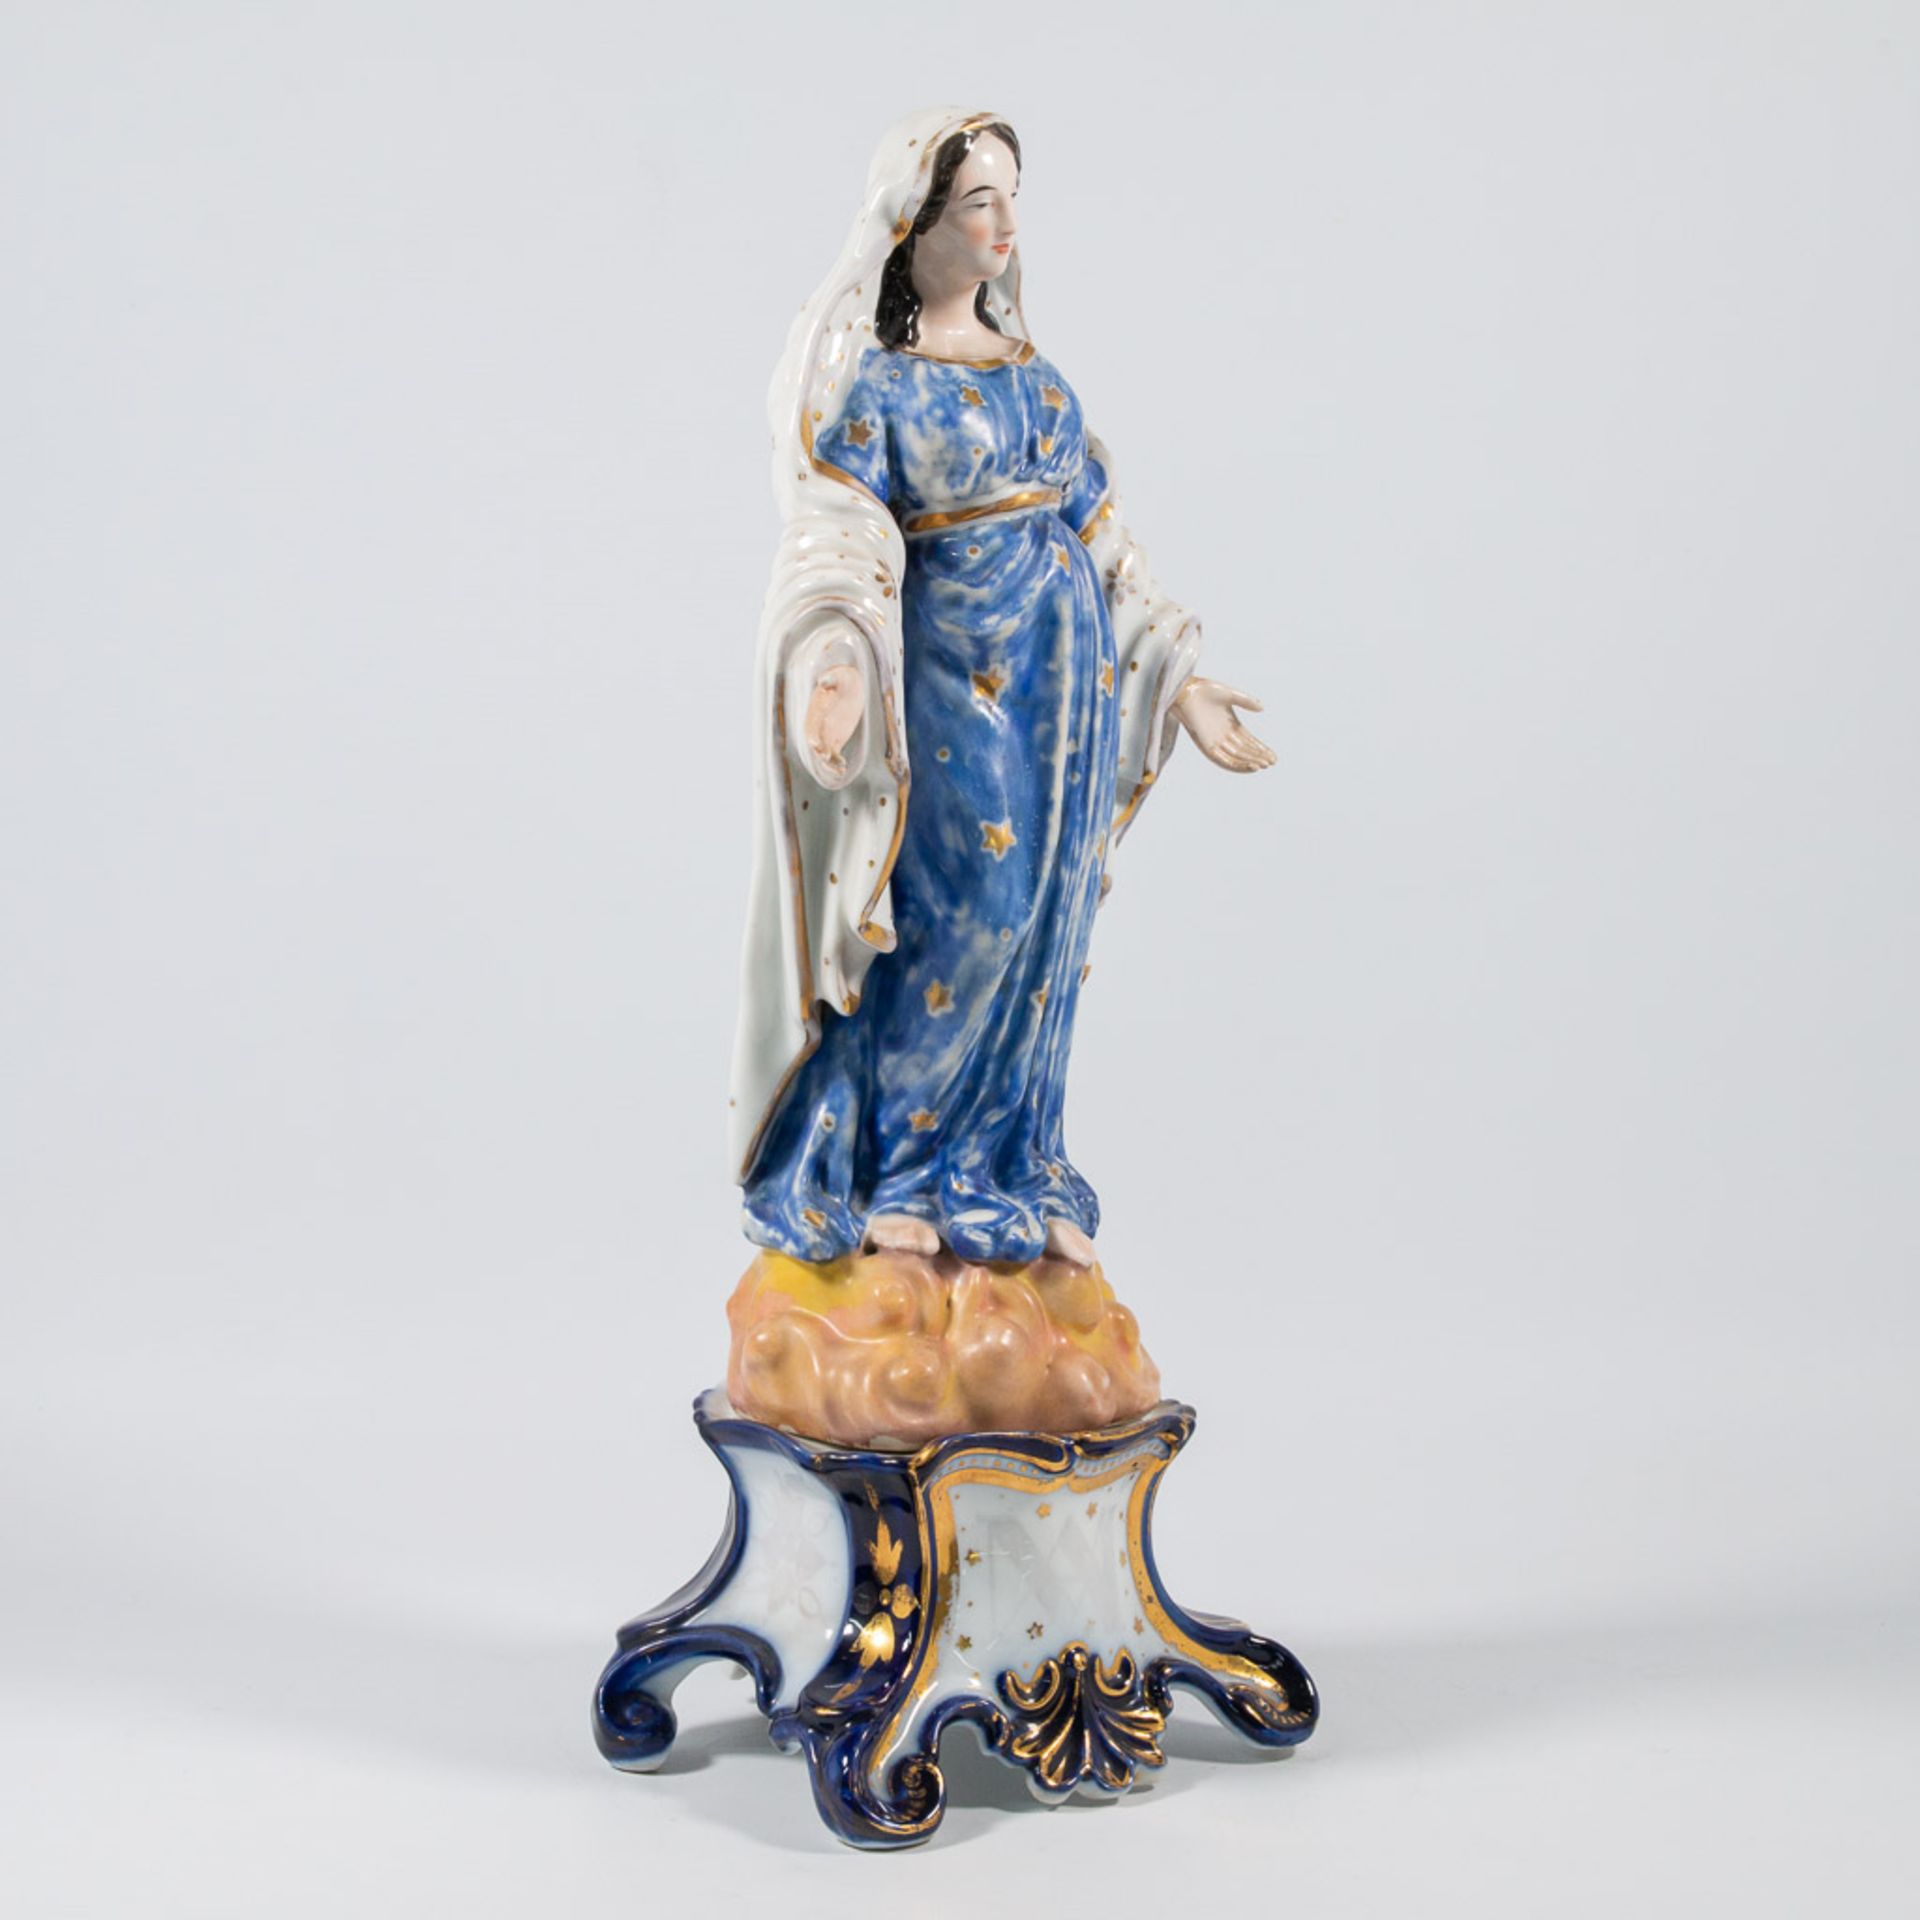 Madonna made of porcelain, 19th century - Image 9 of 18